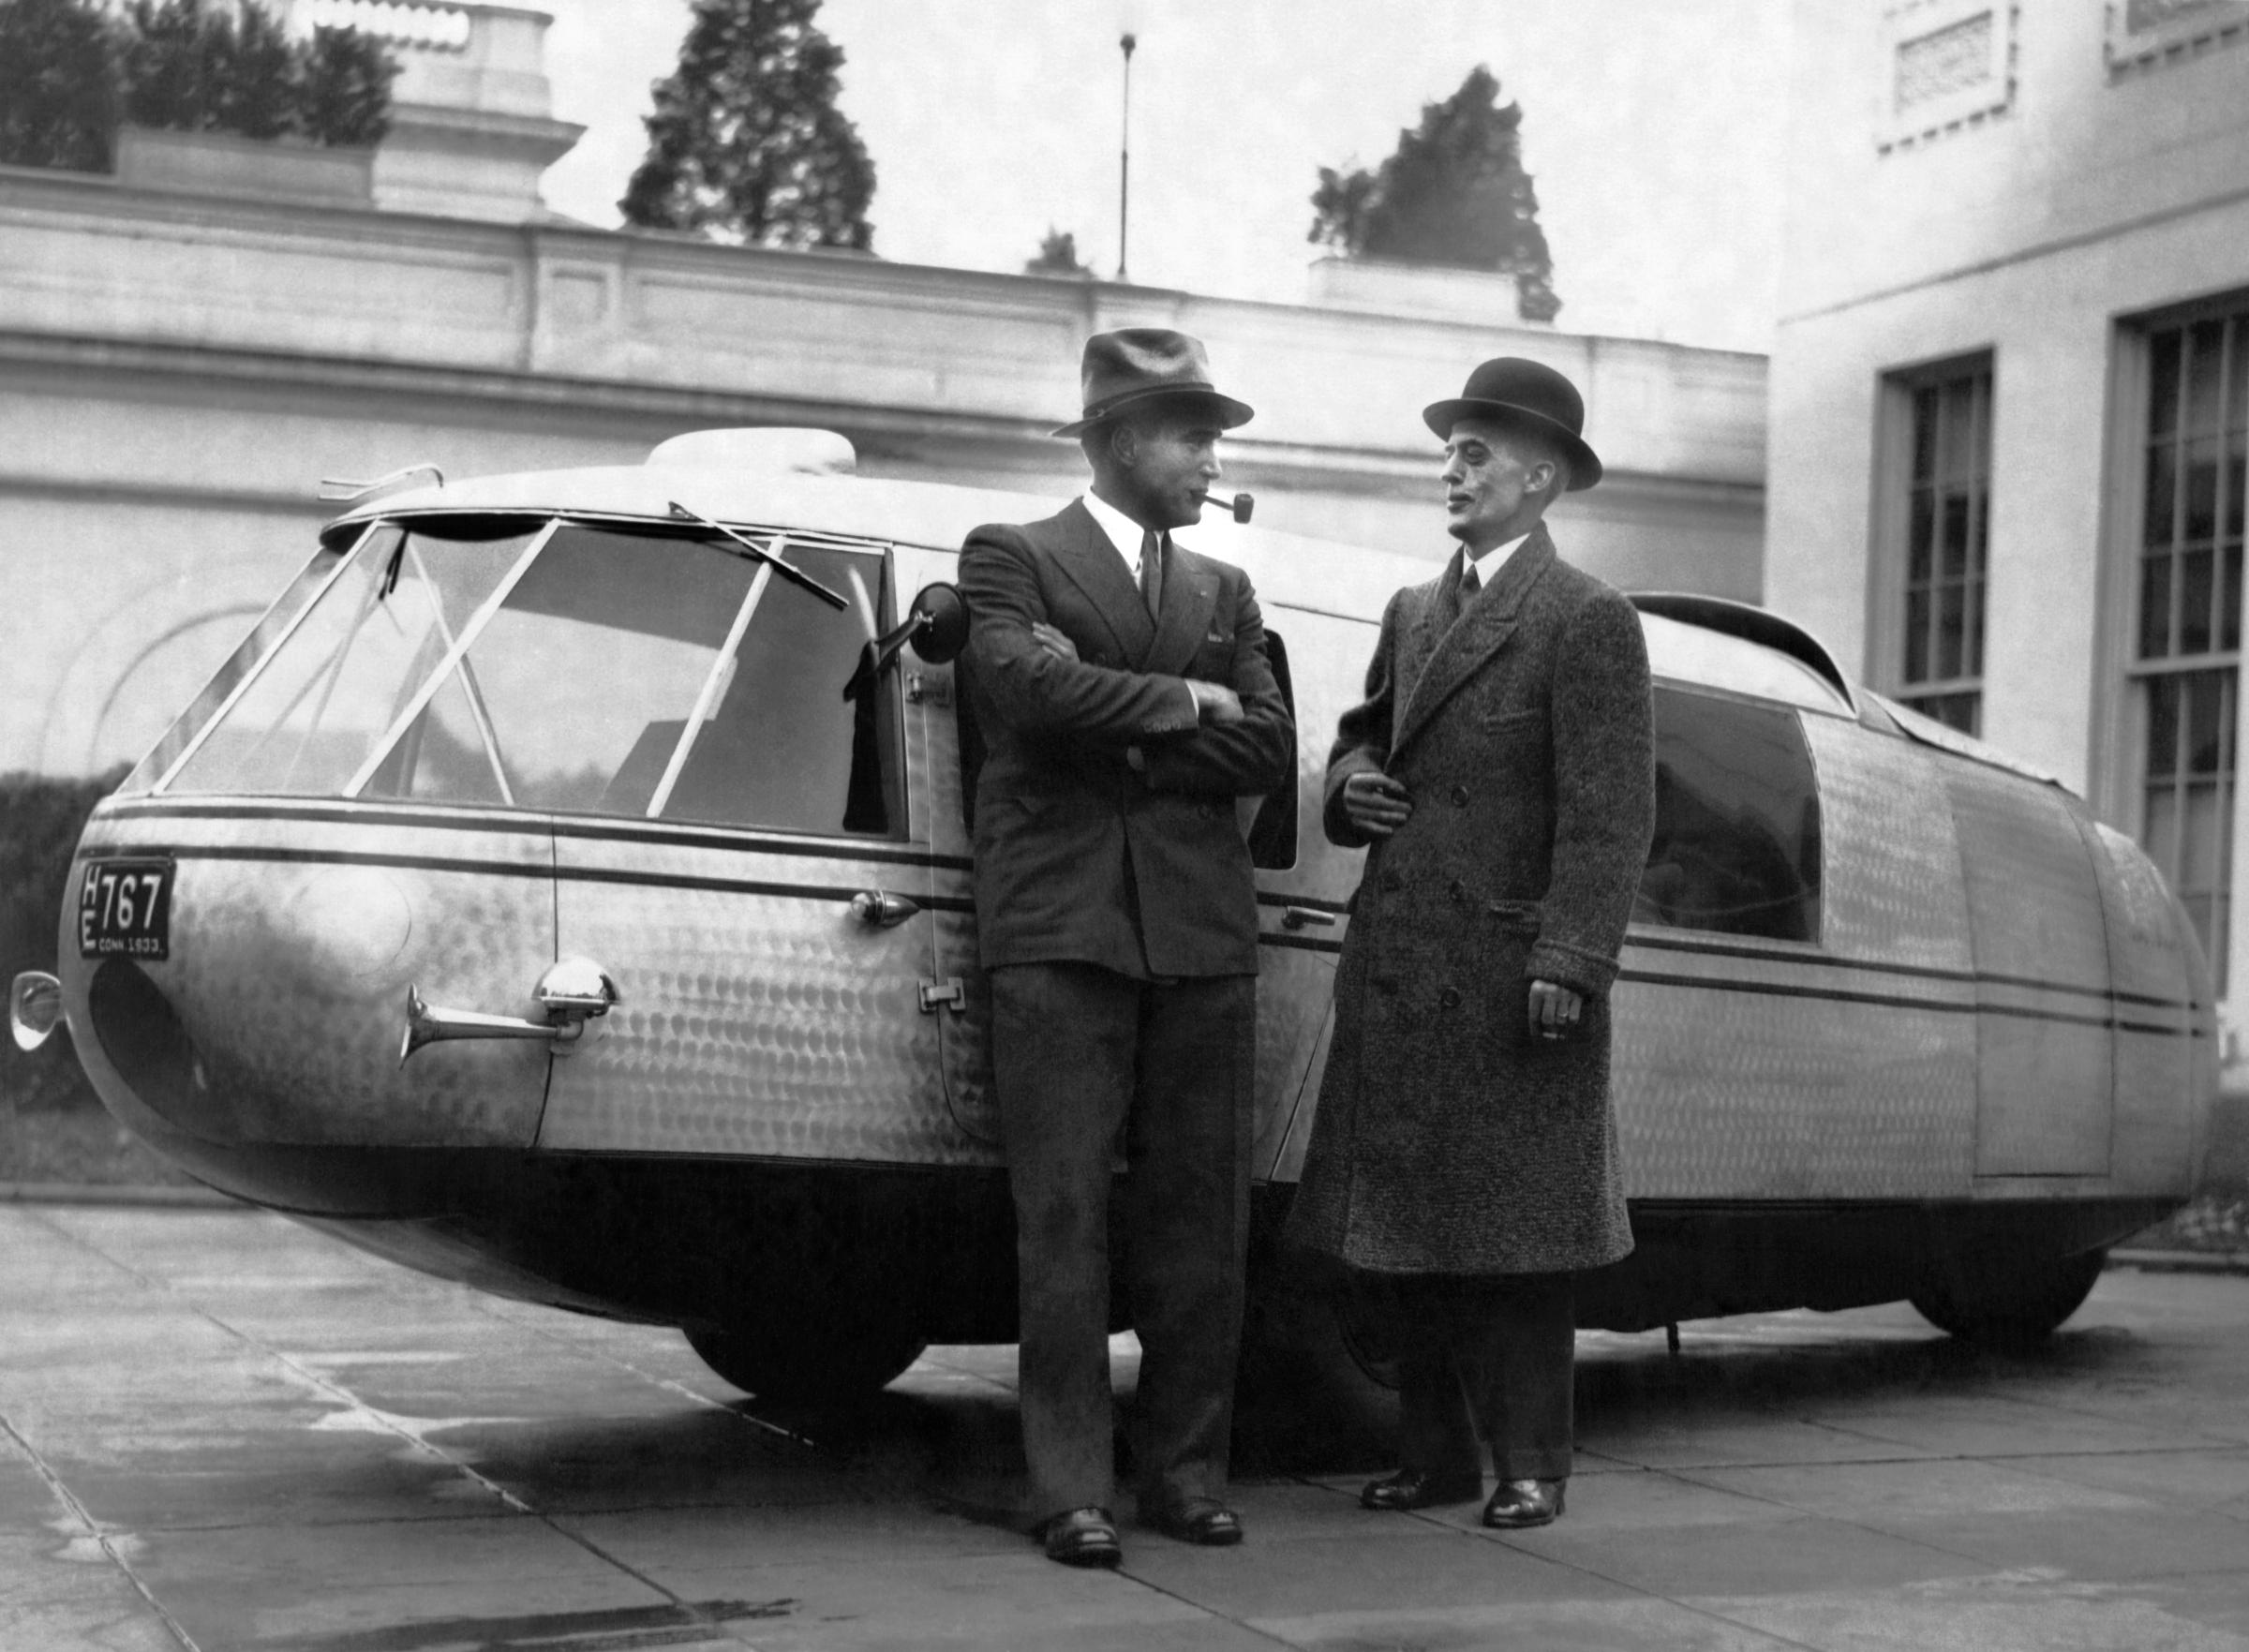 Captain Al Williams, noted speed flyer and driver, and Marvin McIntyre, Secretary to President Roosevelt, standing by the Dymaxion concept car designed by Buckminster Fuller, Washington DC, November 13, 1933. (Photo by Underwood Archives/Getty Images)